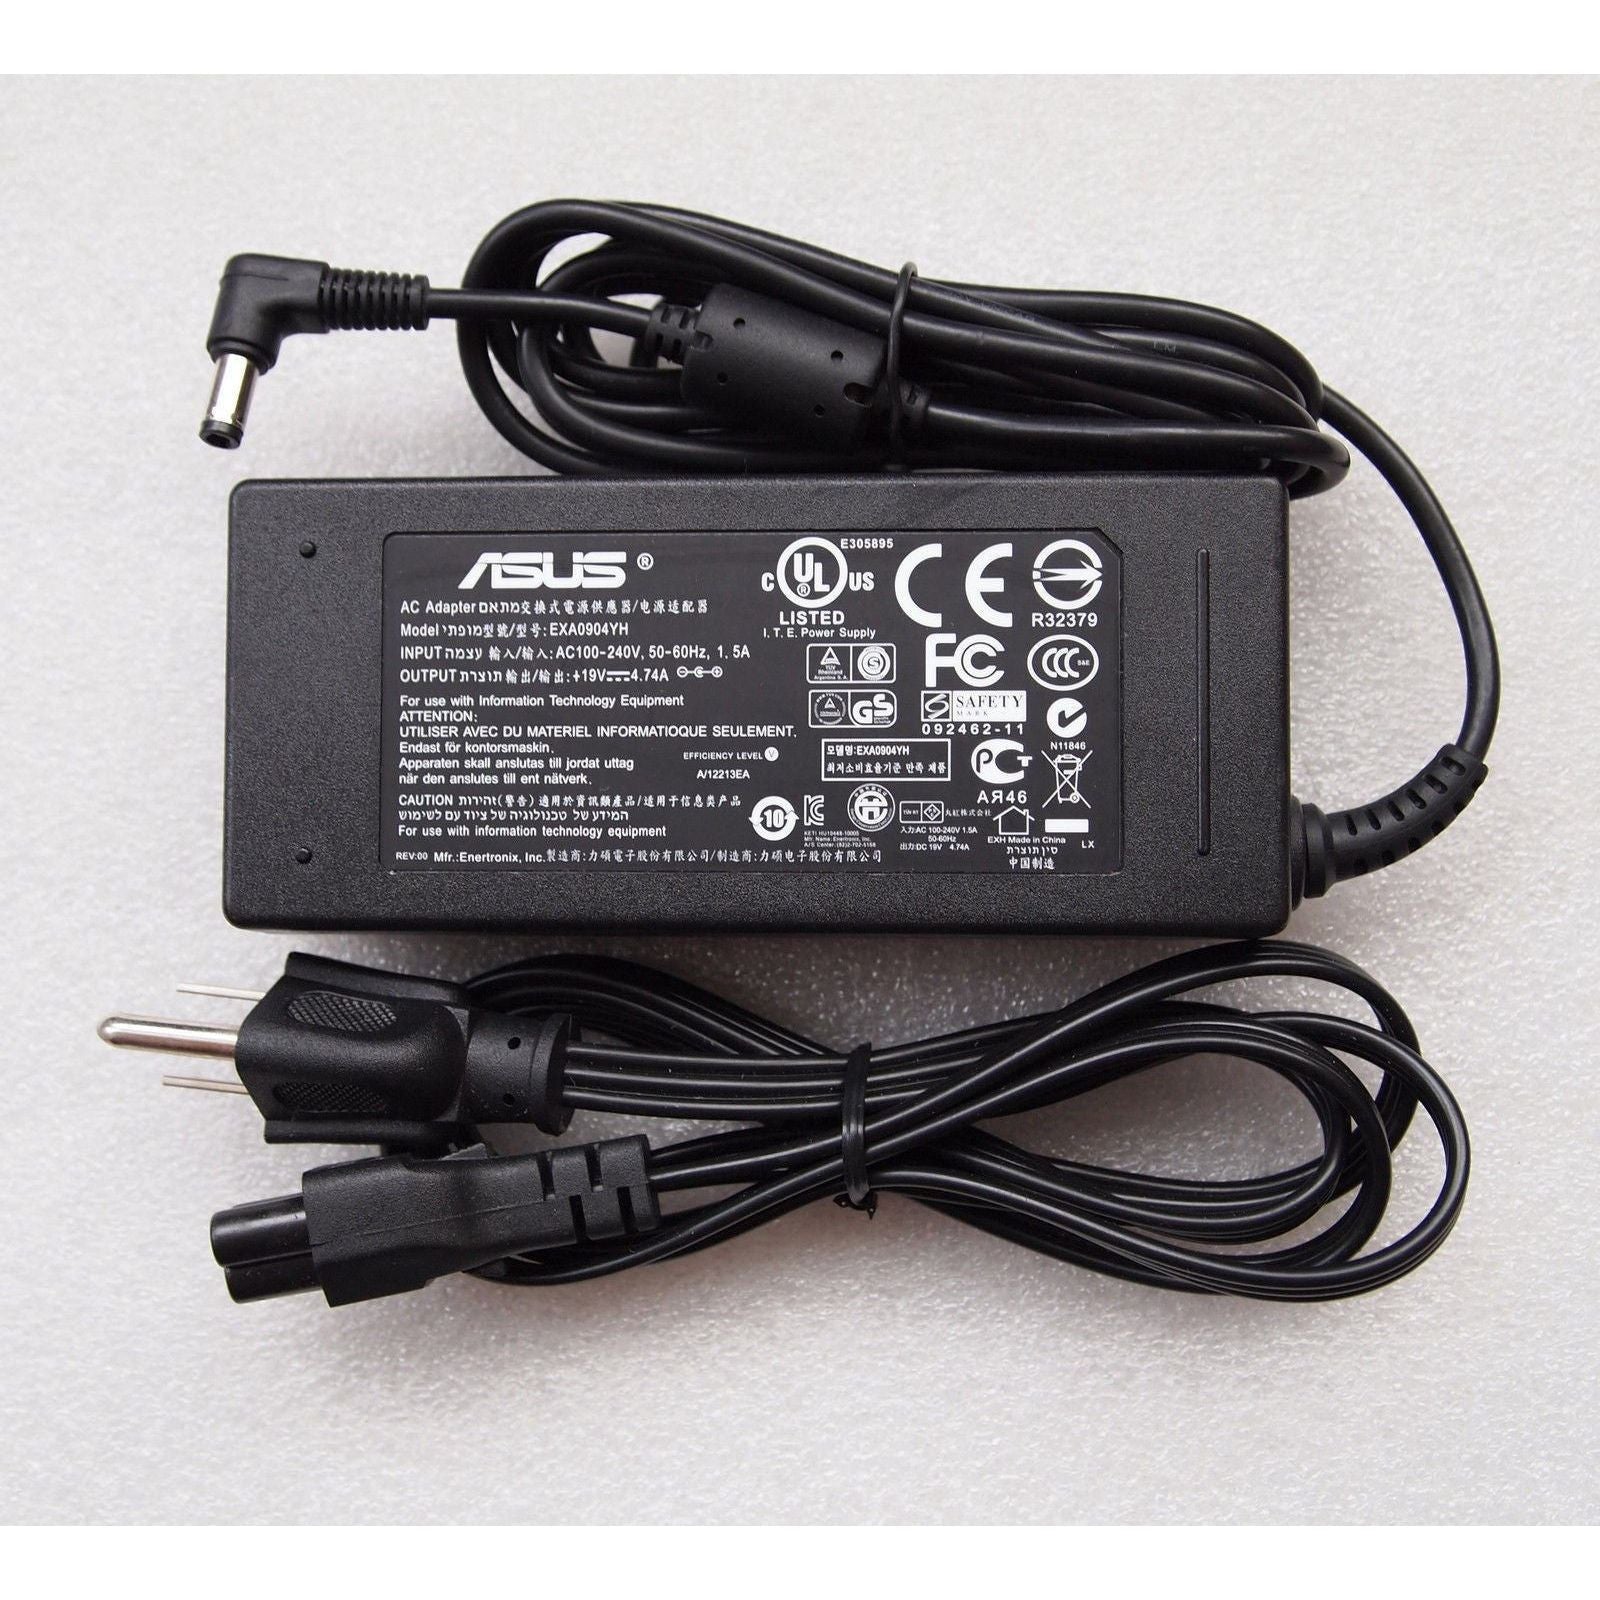 New Genuine Asus F9 F9Dc F9S F9Sg AC Adapter Charger EXA0904YH 90W